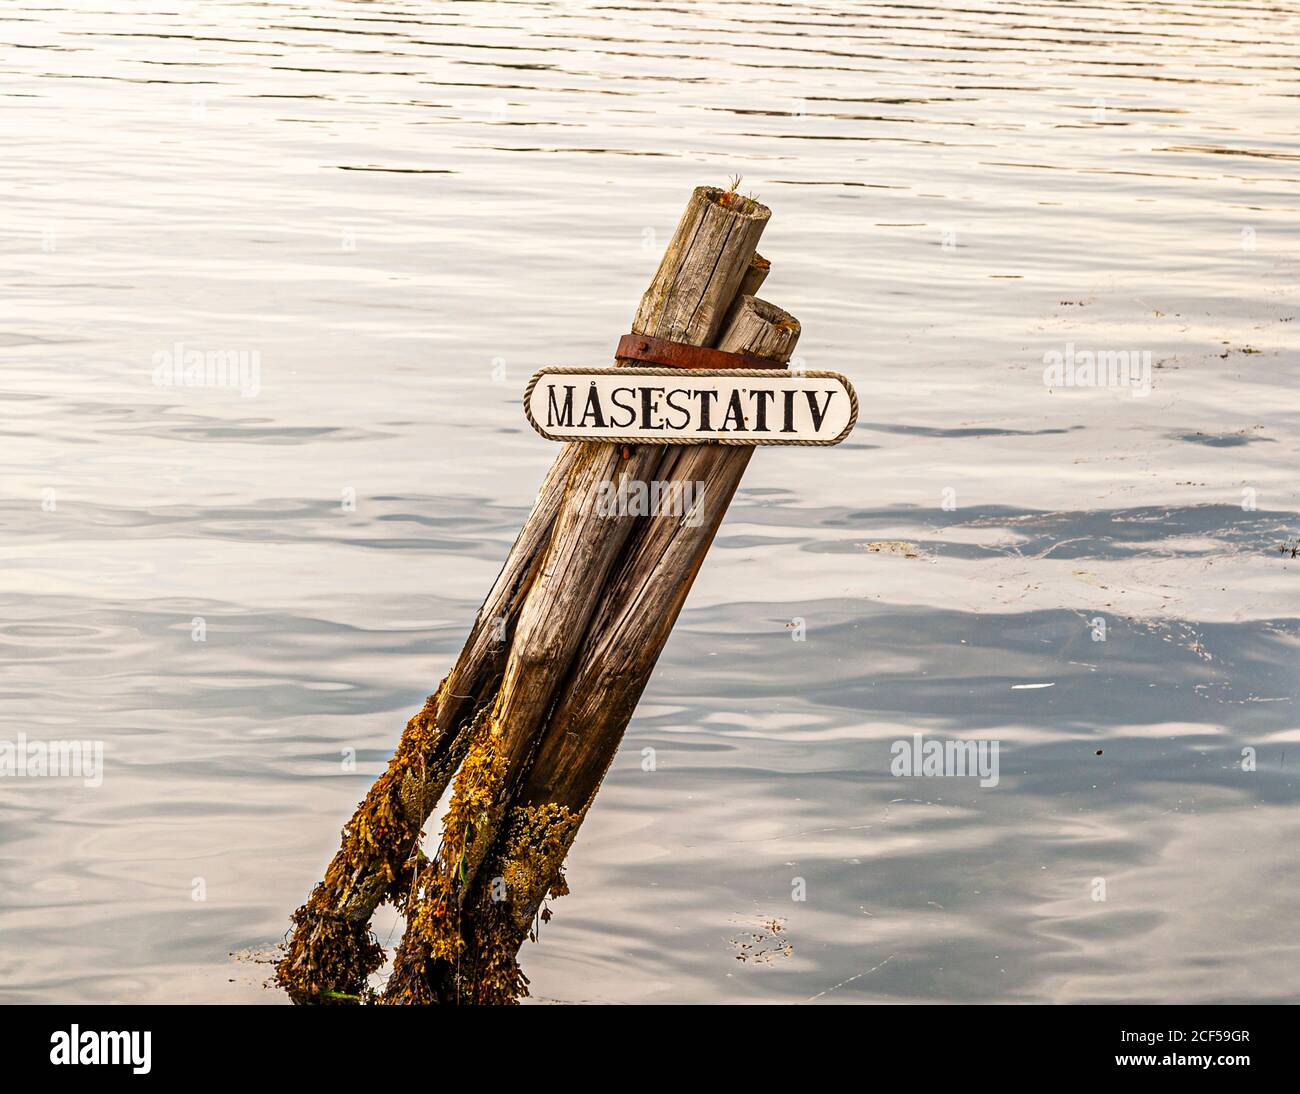 Bollard to which you can tie up ships. Masestativ: Mass Stand in the Harbor of Kristiansund, Norway Stock Photo